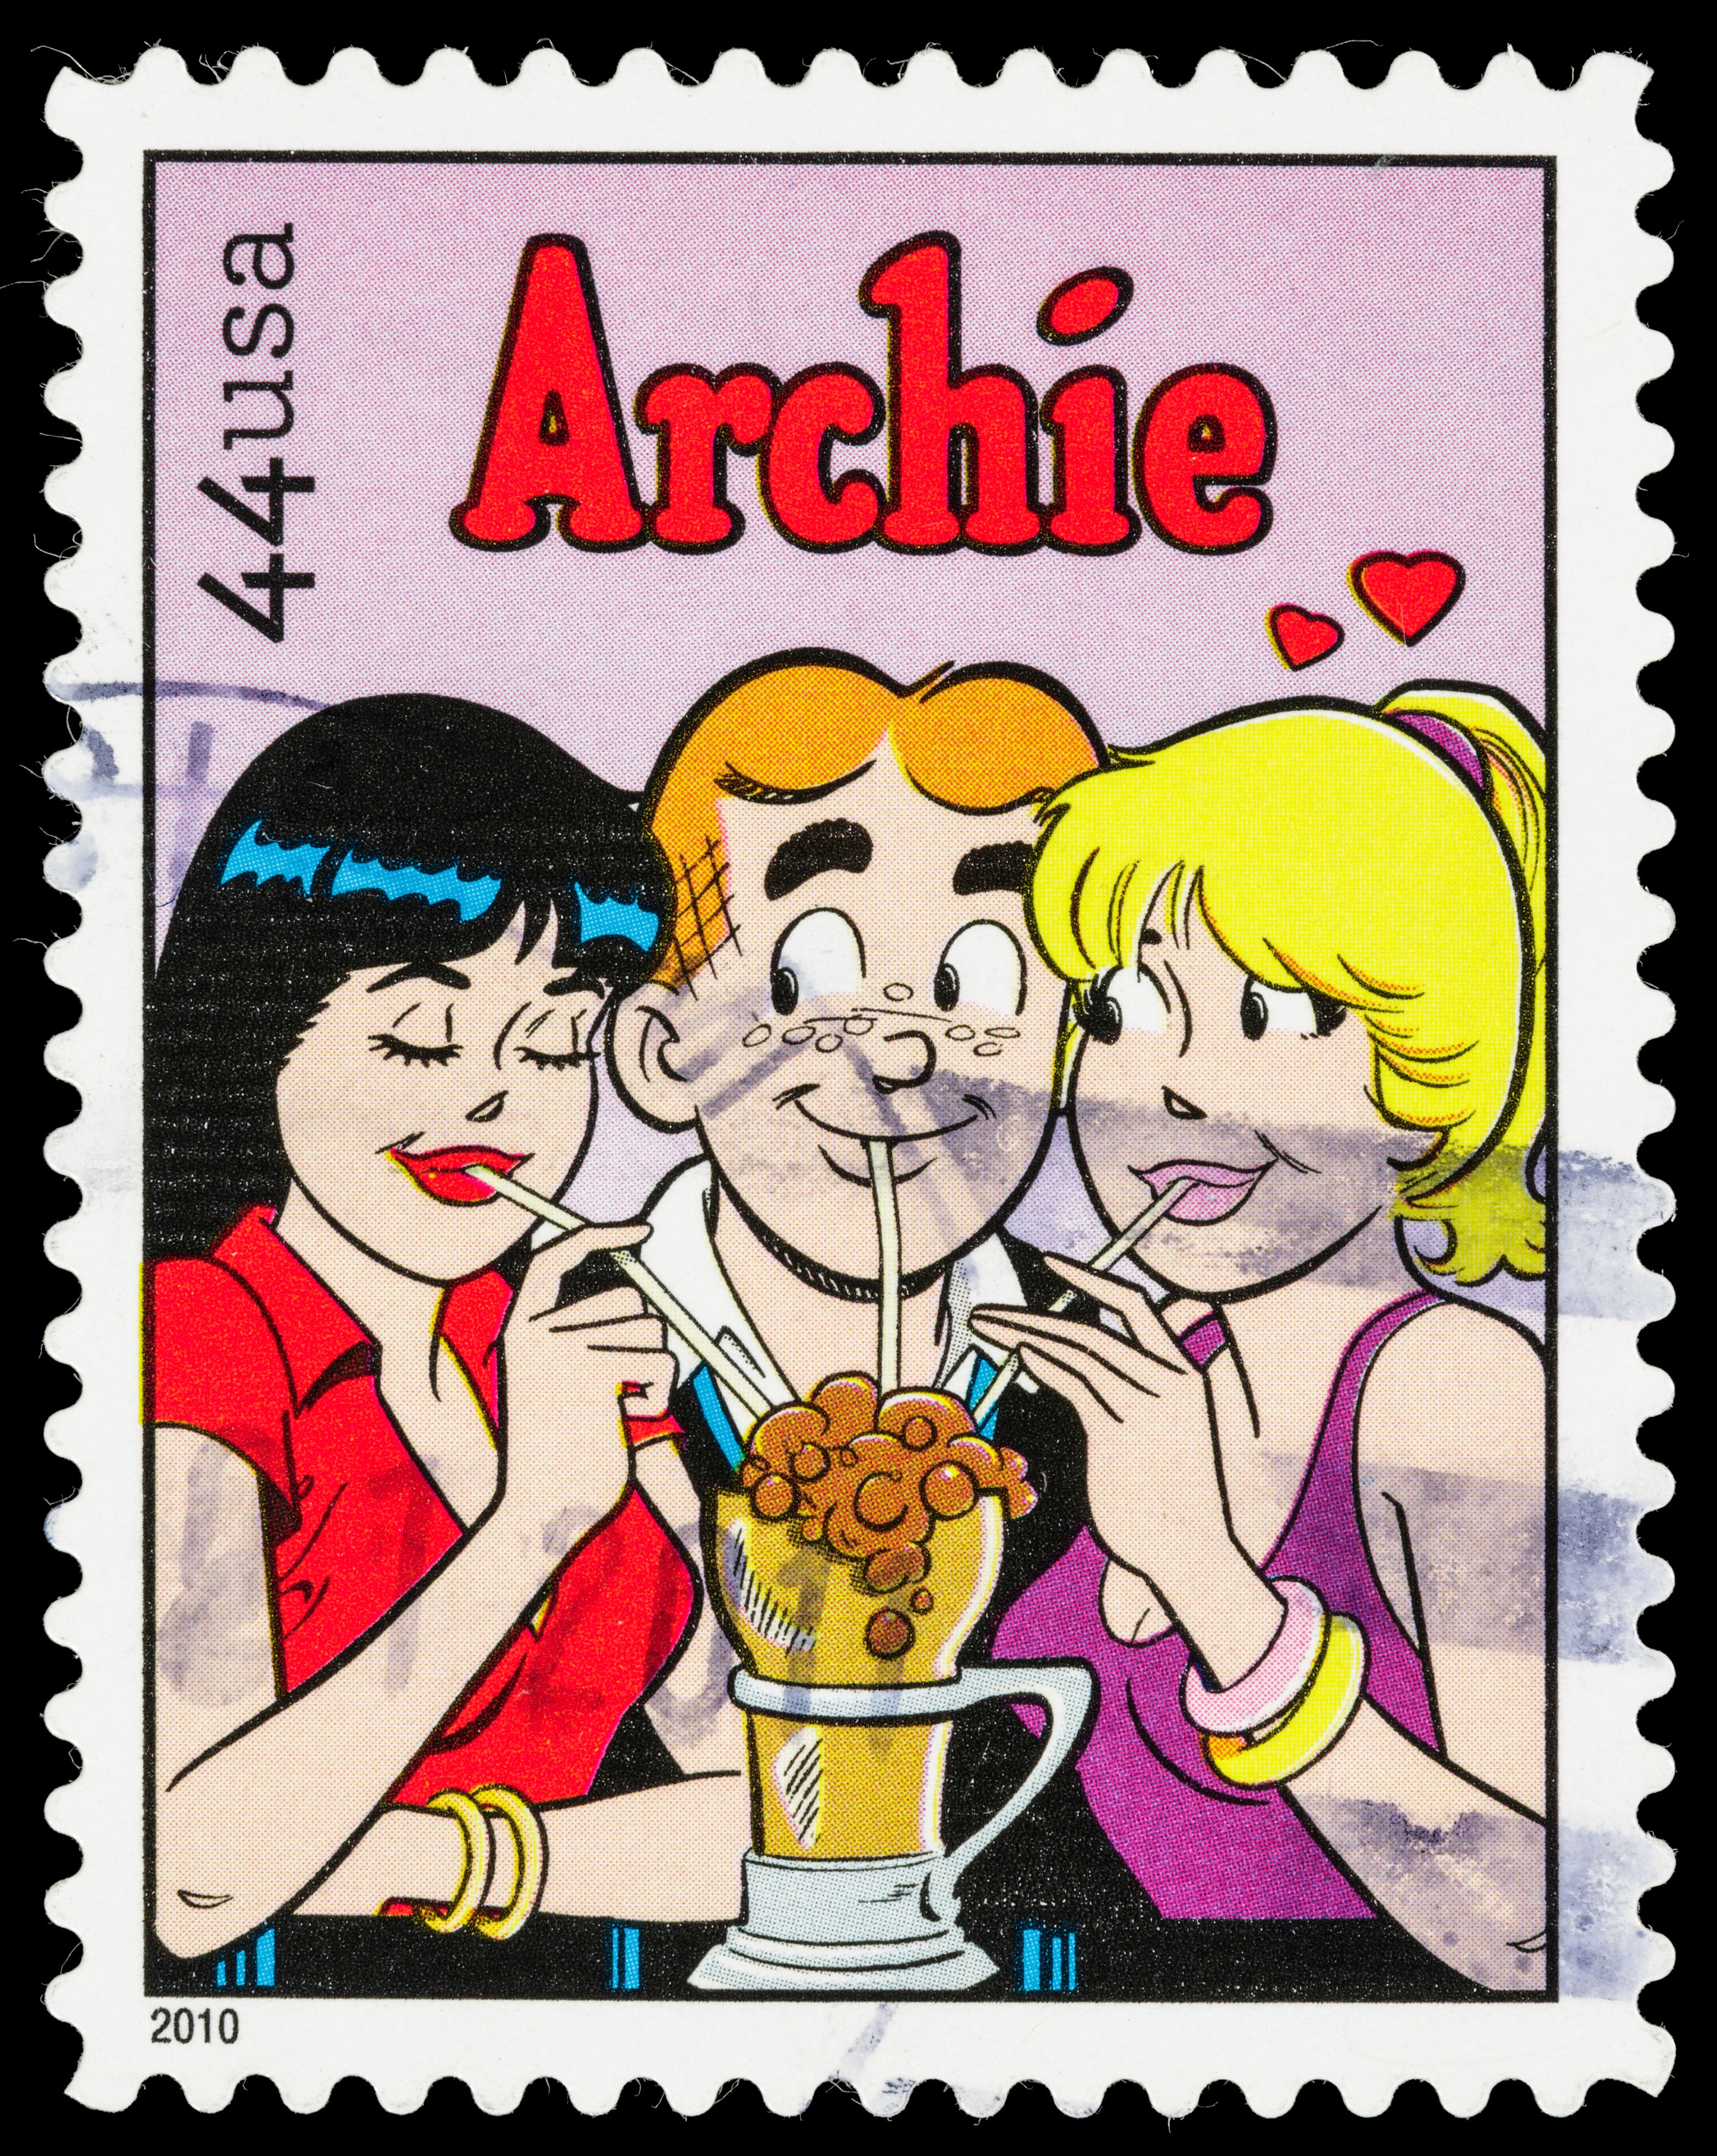 A US stamp featuring characters from the Archie comic series, including (from L to R) Veronica, Archie and Betty